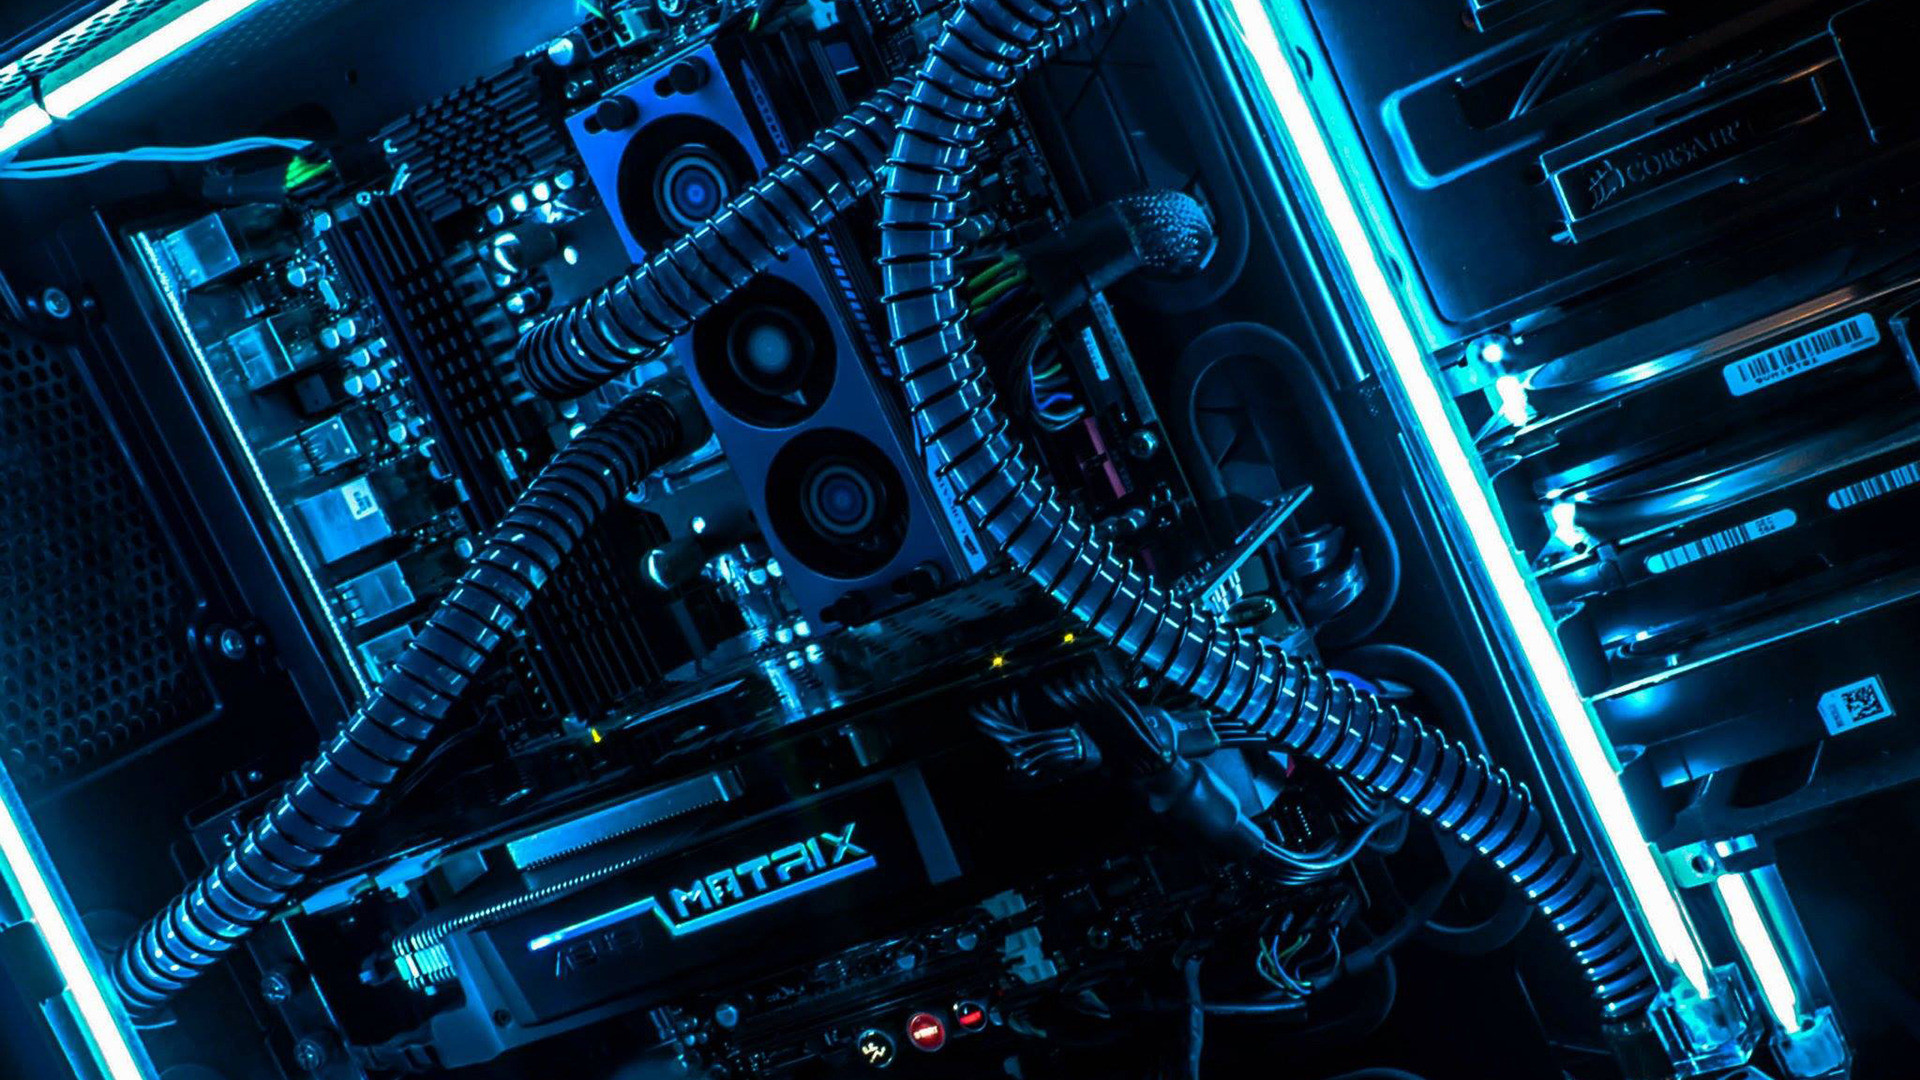 1920x1080 Explore Technology News, Hd Wallpaper, and more!